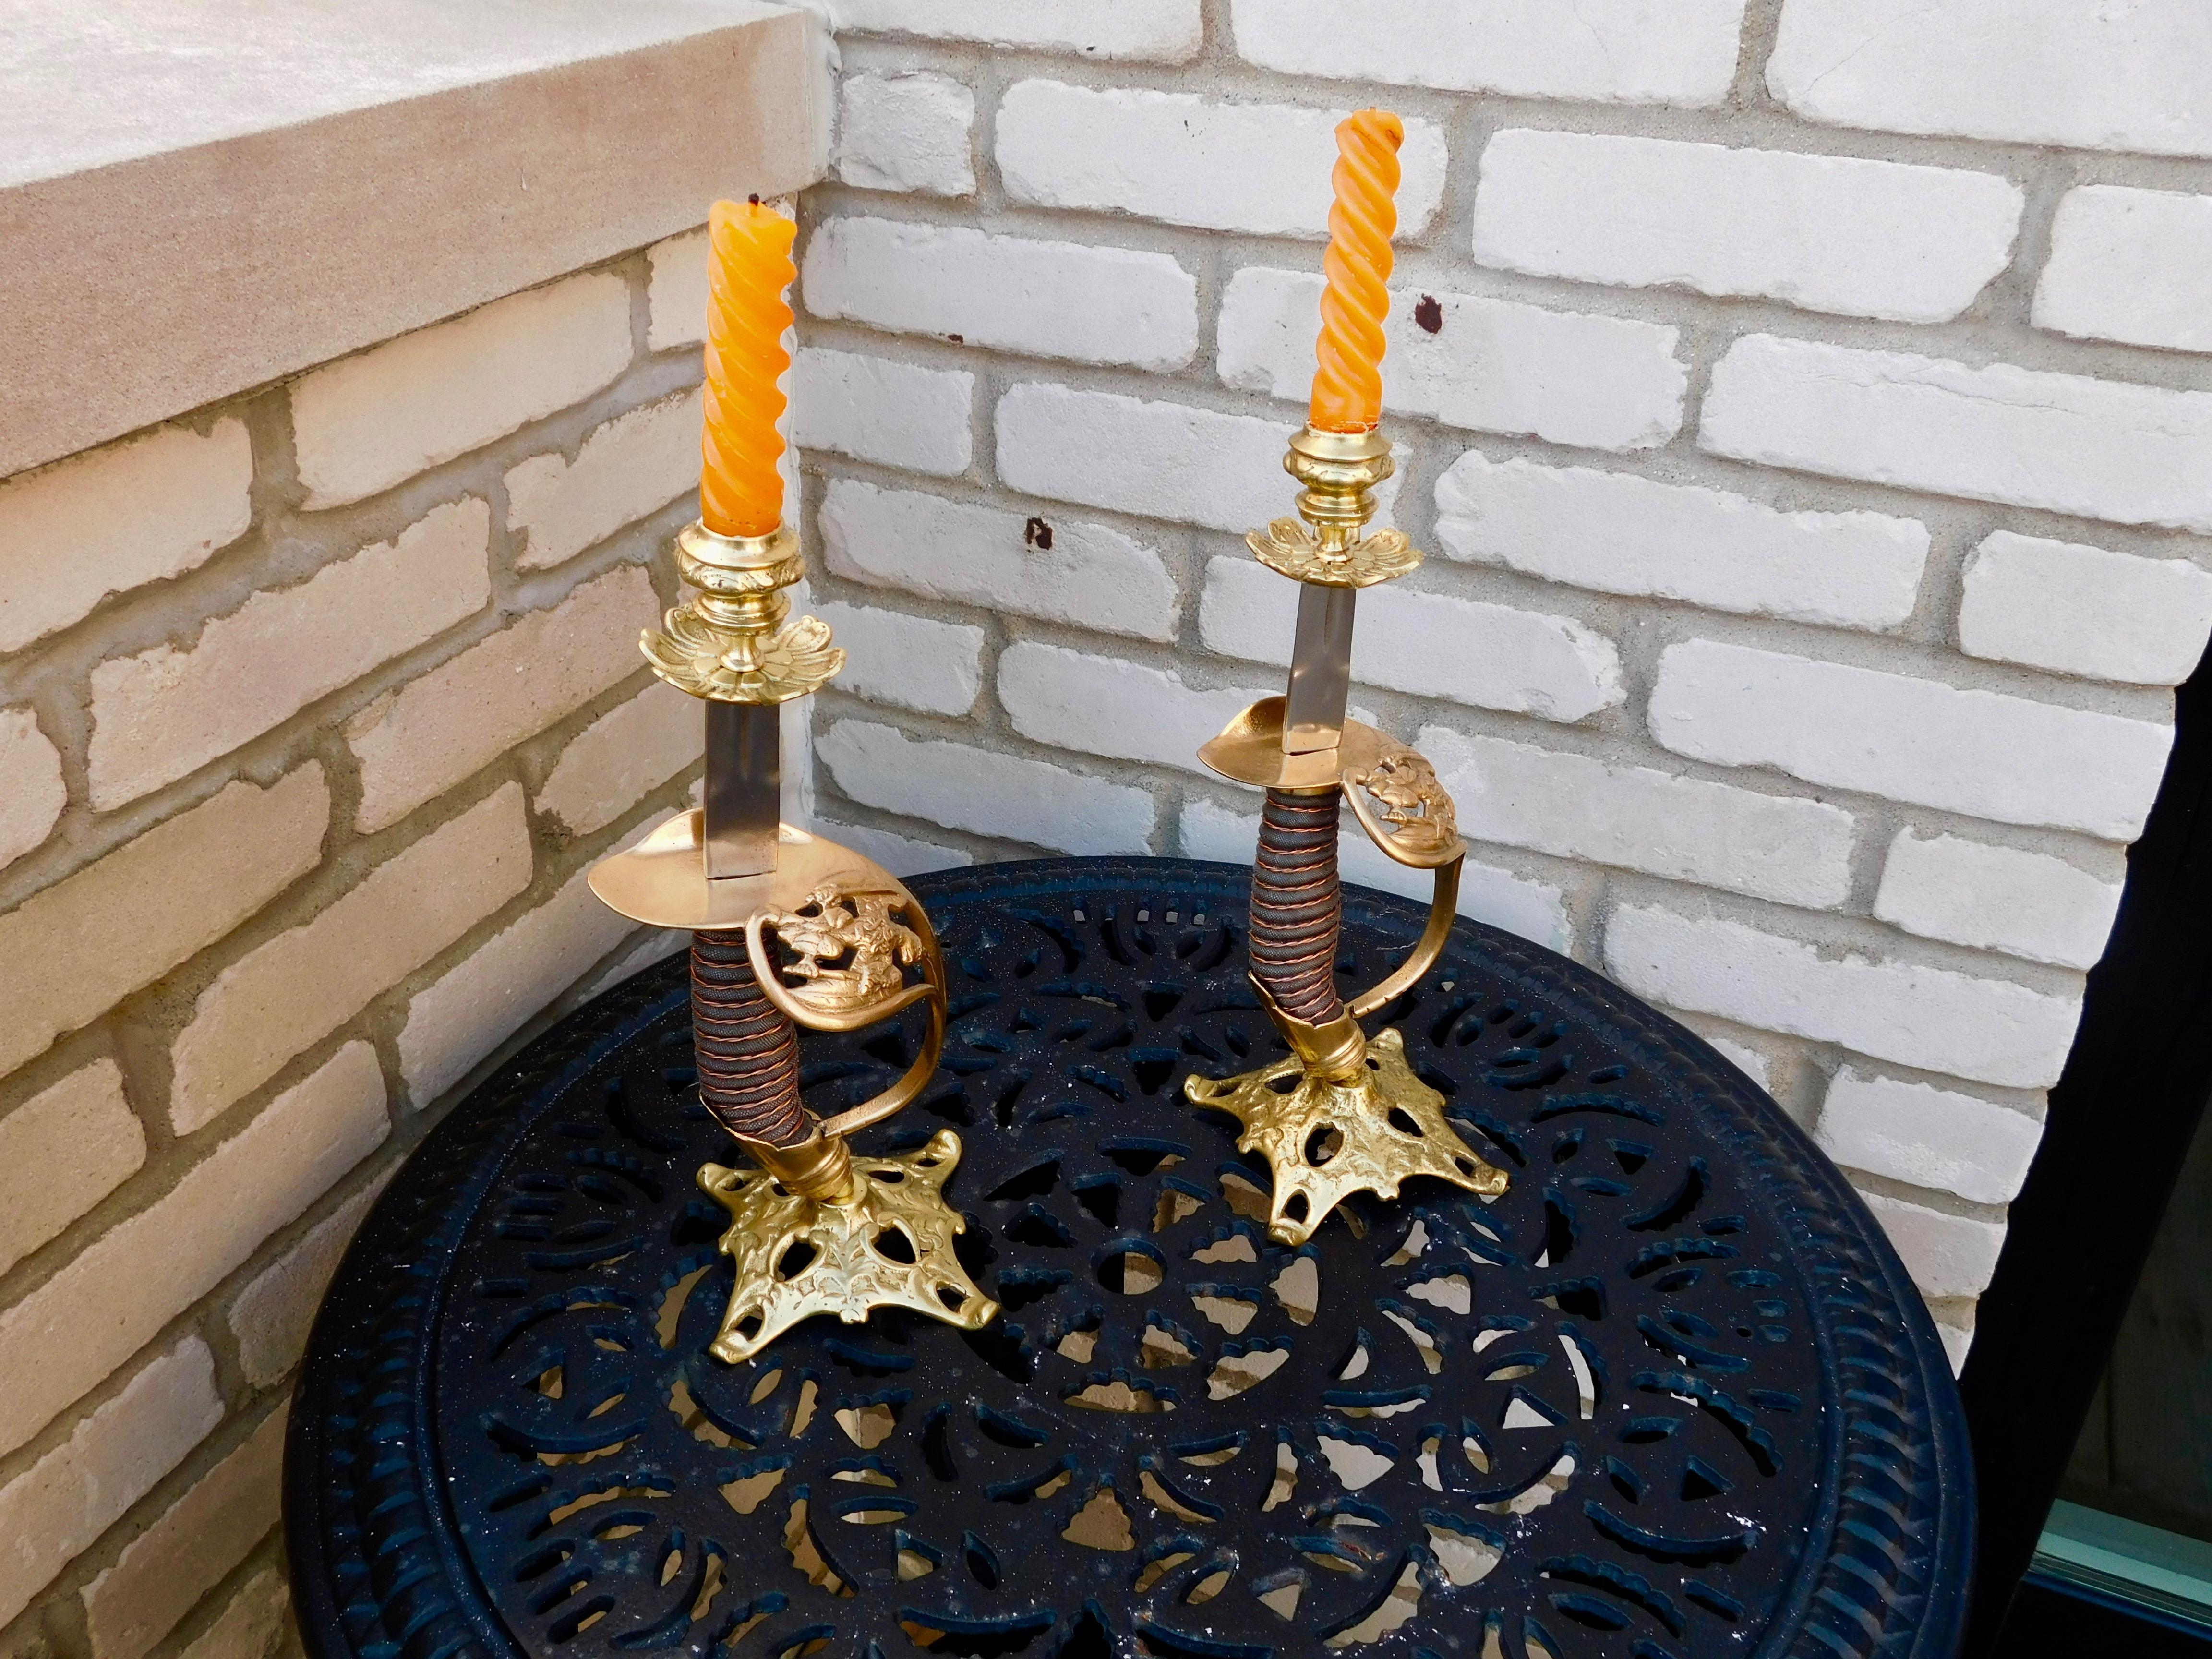 Pair of Antique Candle Holders made from 1889 model Prussian infantry officer's swords. They would of been made from unused swords, the manufacturer would create these candlesticks to give as gifts to stores as incentives to get favor to carry their